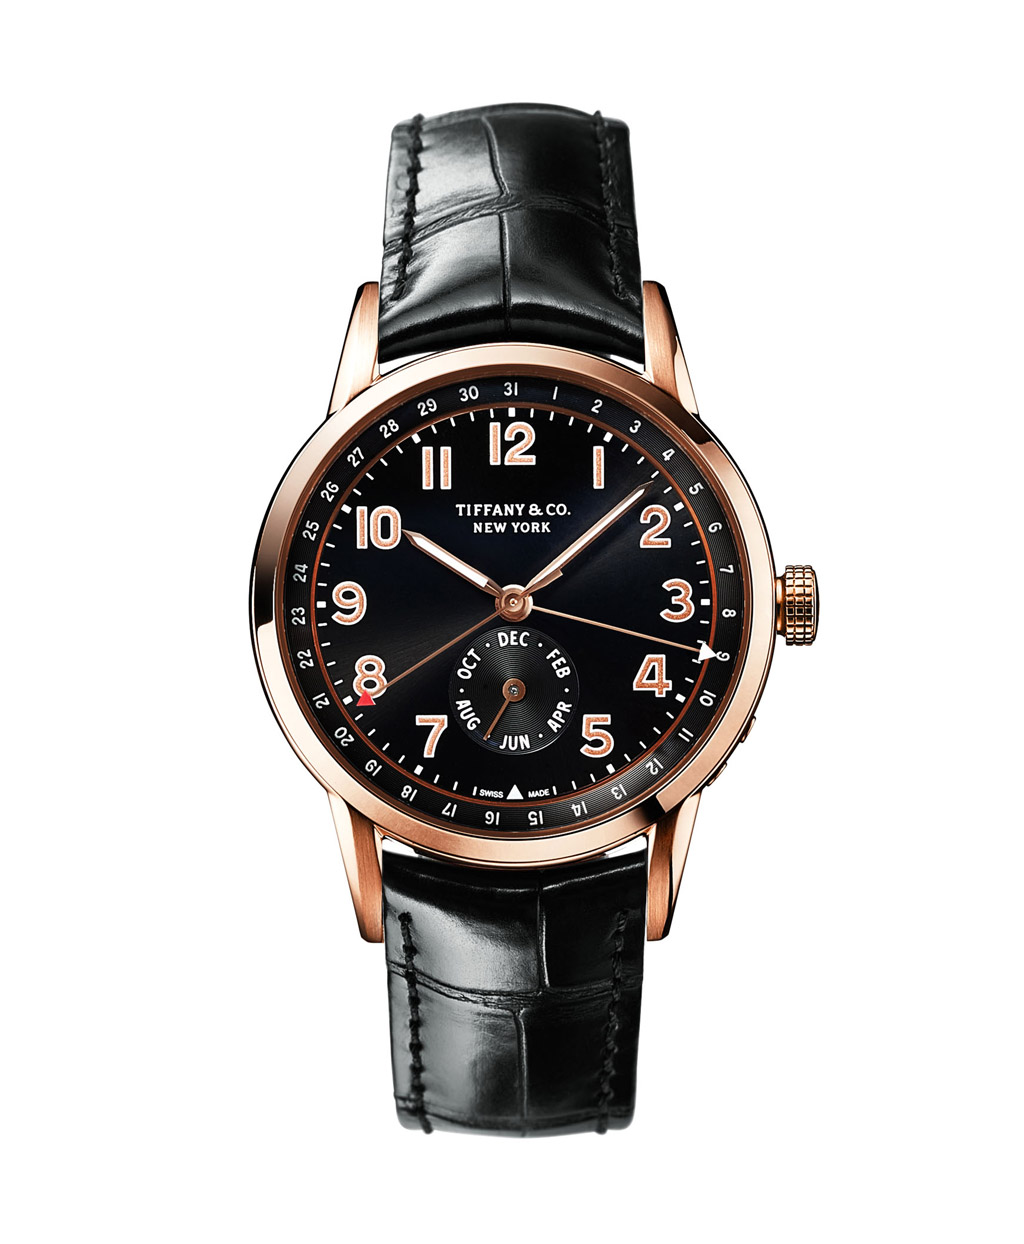 The Tiffany CT60 collection was launched in April 2015. A striking calendar watch with a masculine profile and vintage appeal. Founder Charles Lewis Tiffany’s reputation as timekeeper of New York City’s frenetic pace—famously referred to as the New York Minute—is richly reflected in the watch’s month and date double-complication, and self-winding mechanical movement of the finest Swiss pedigree, with Côtes de Genève, Colimaçon, Perlage finishing and gold poudré numerals.